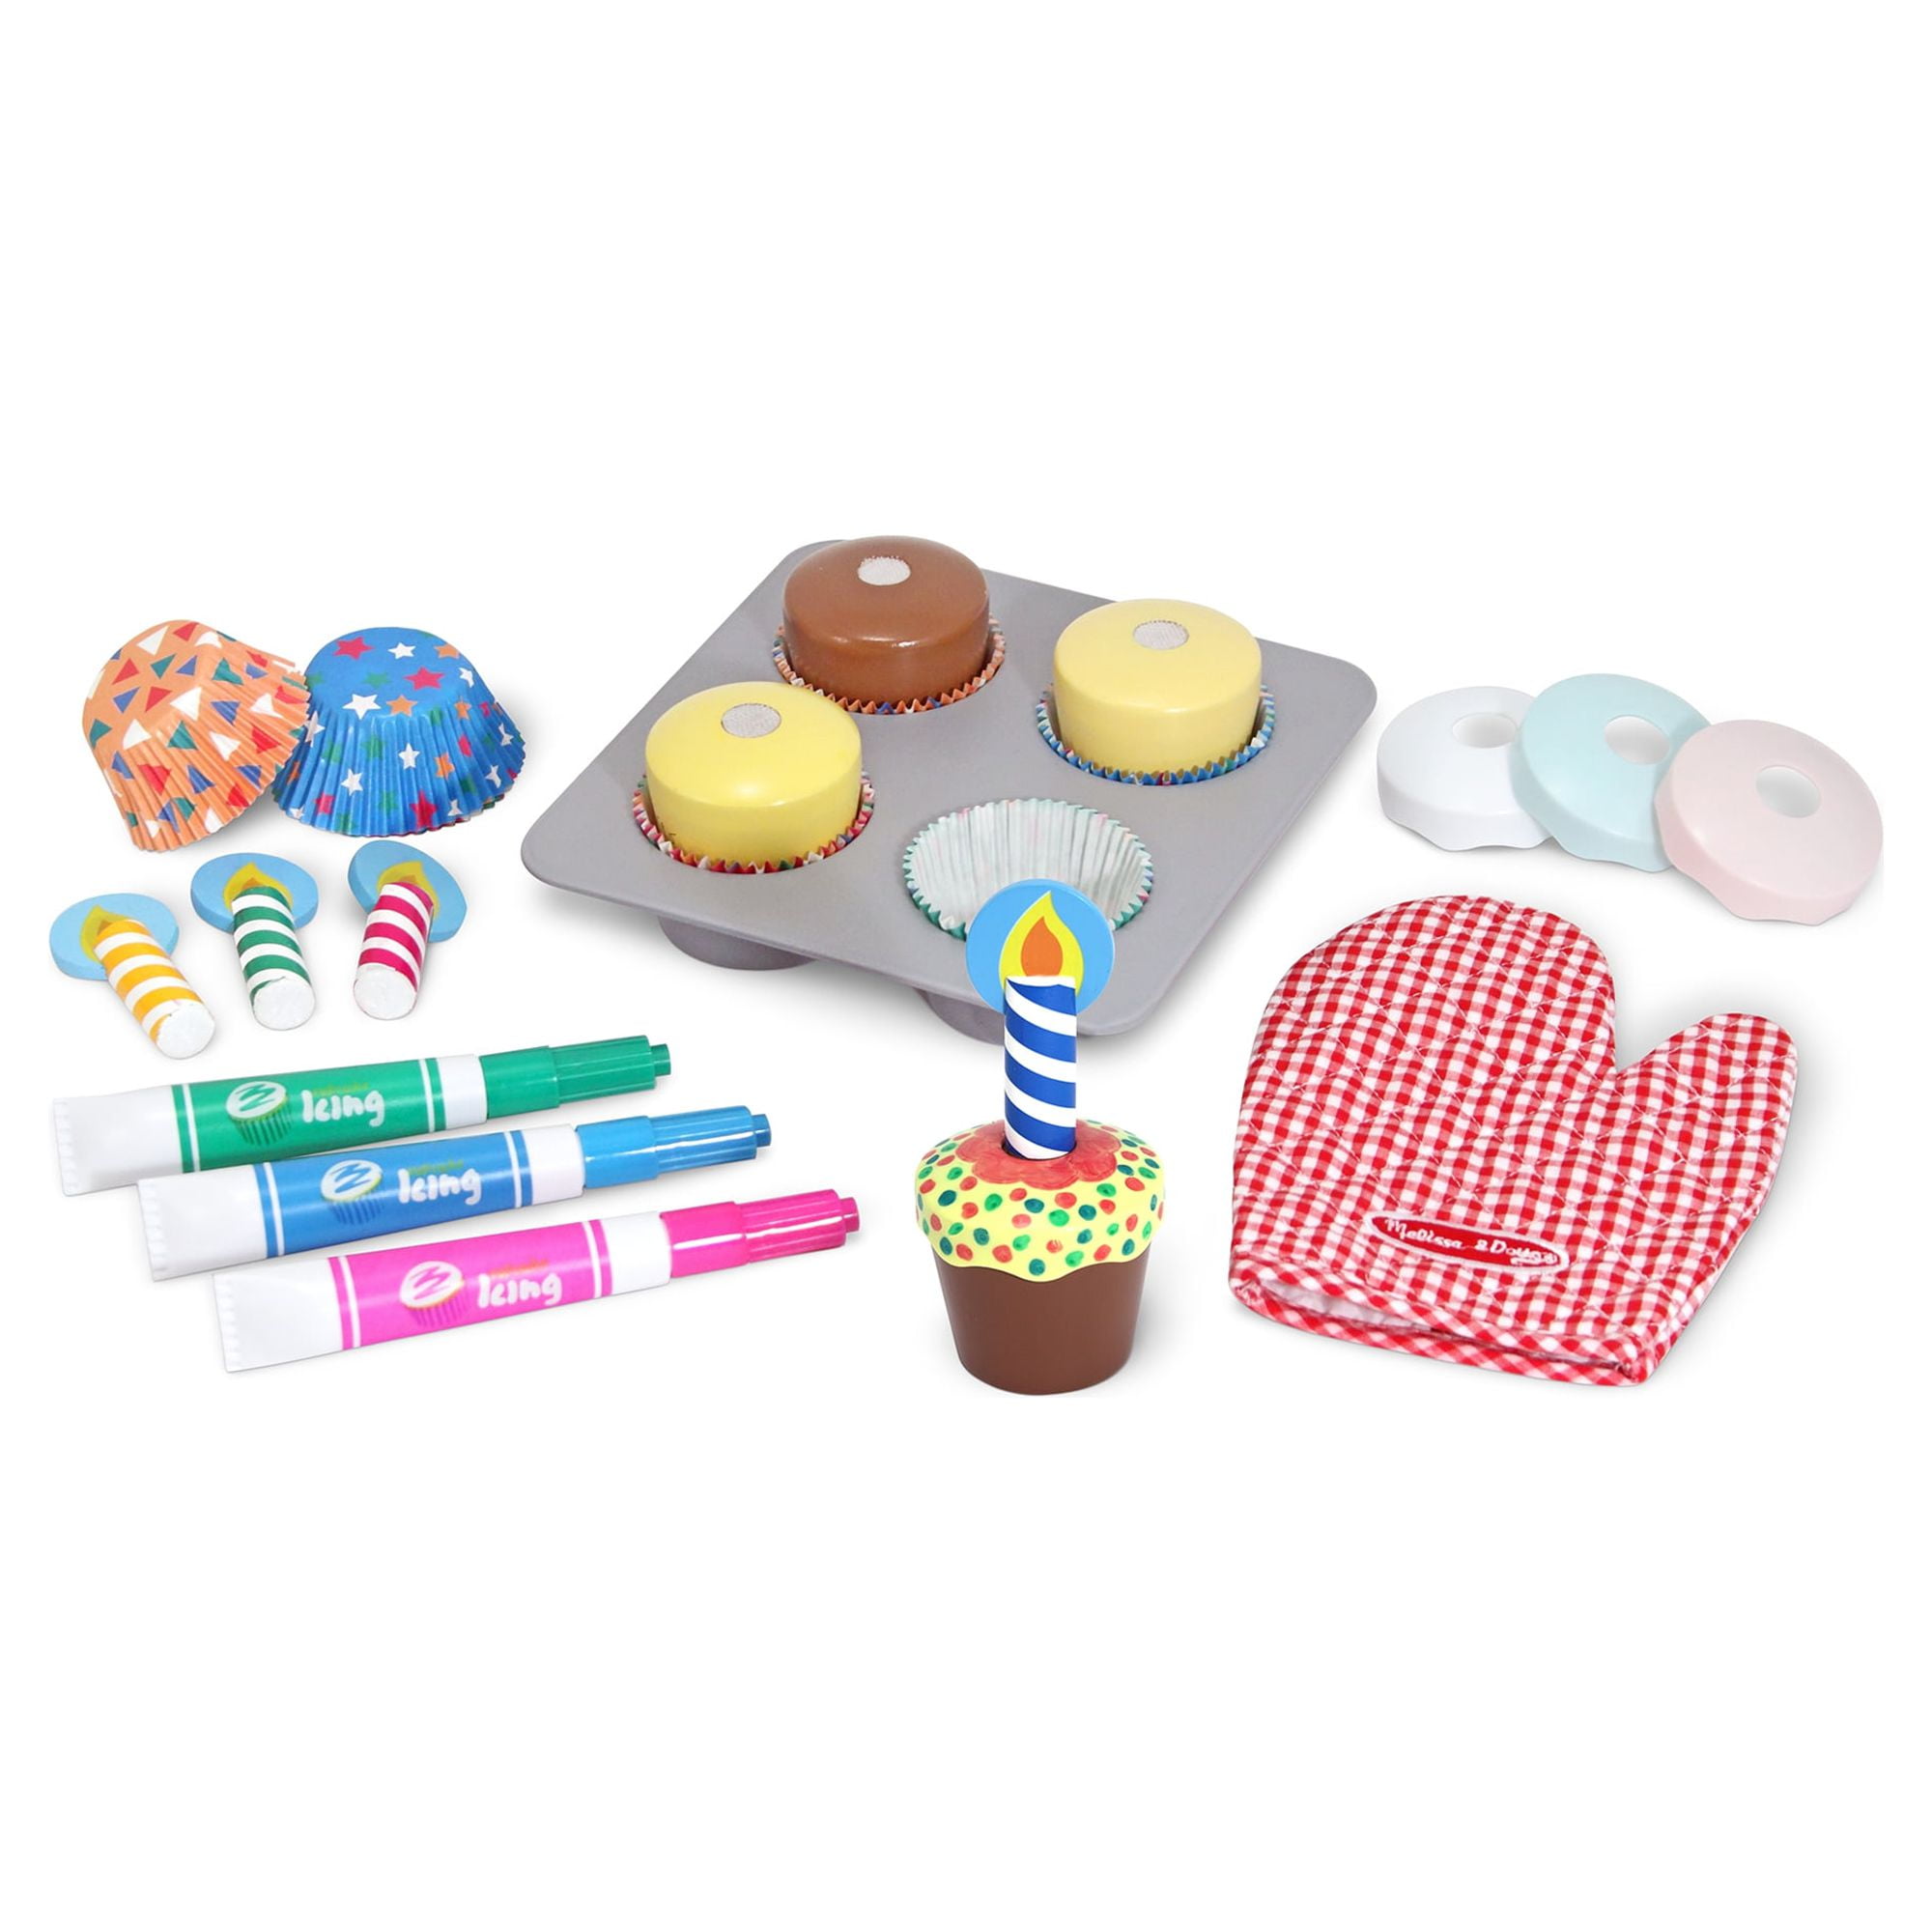 Easy Bake Oven Gift Set with Baking Tools, Cupcakes Refill Mix, Pink Apron Plus More, Size: 22.5 in